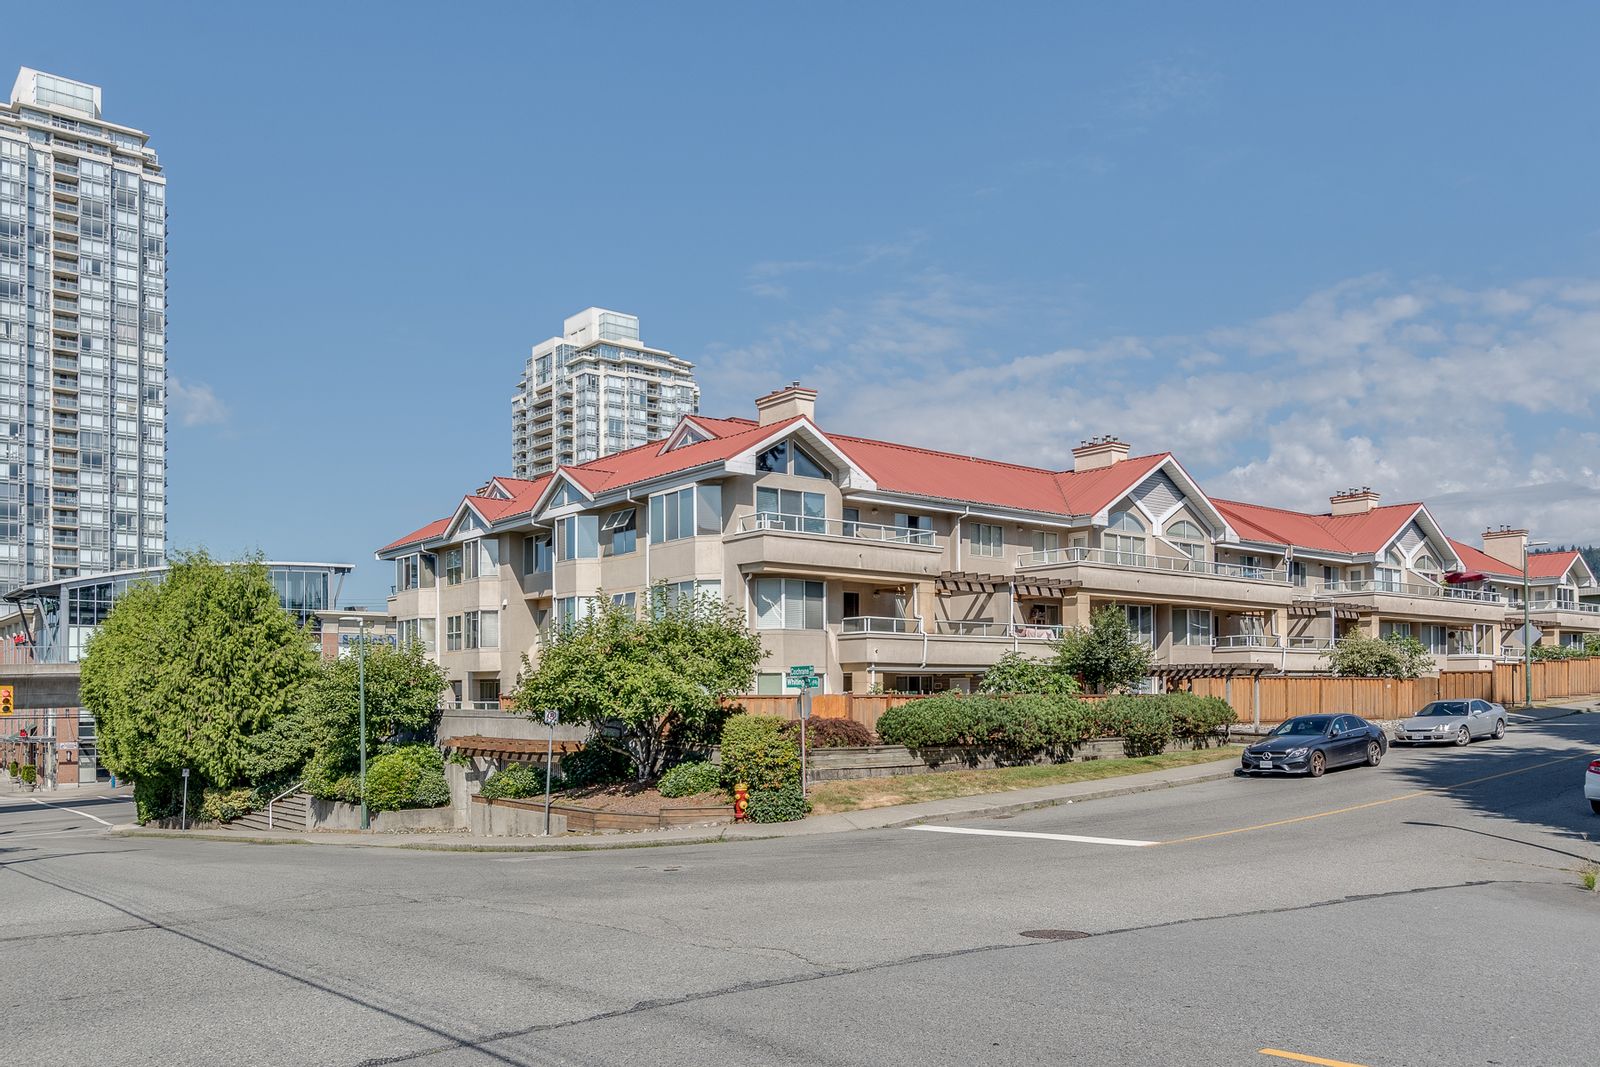 Just Listed: 312 501 Cochrane Ave., Coquitlam, Coquitlam West